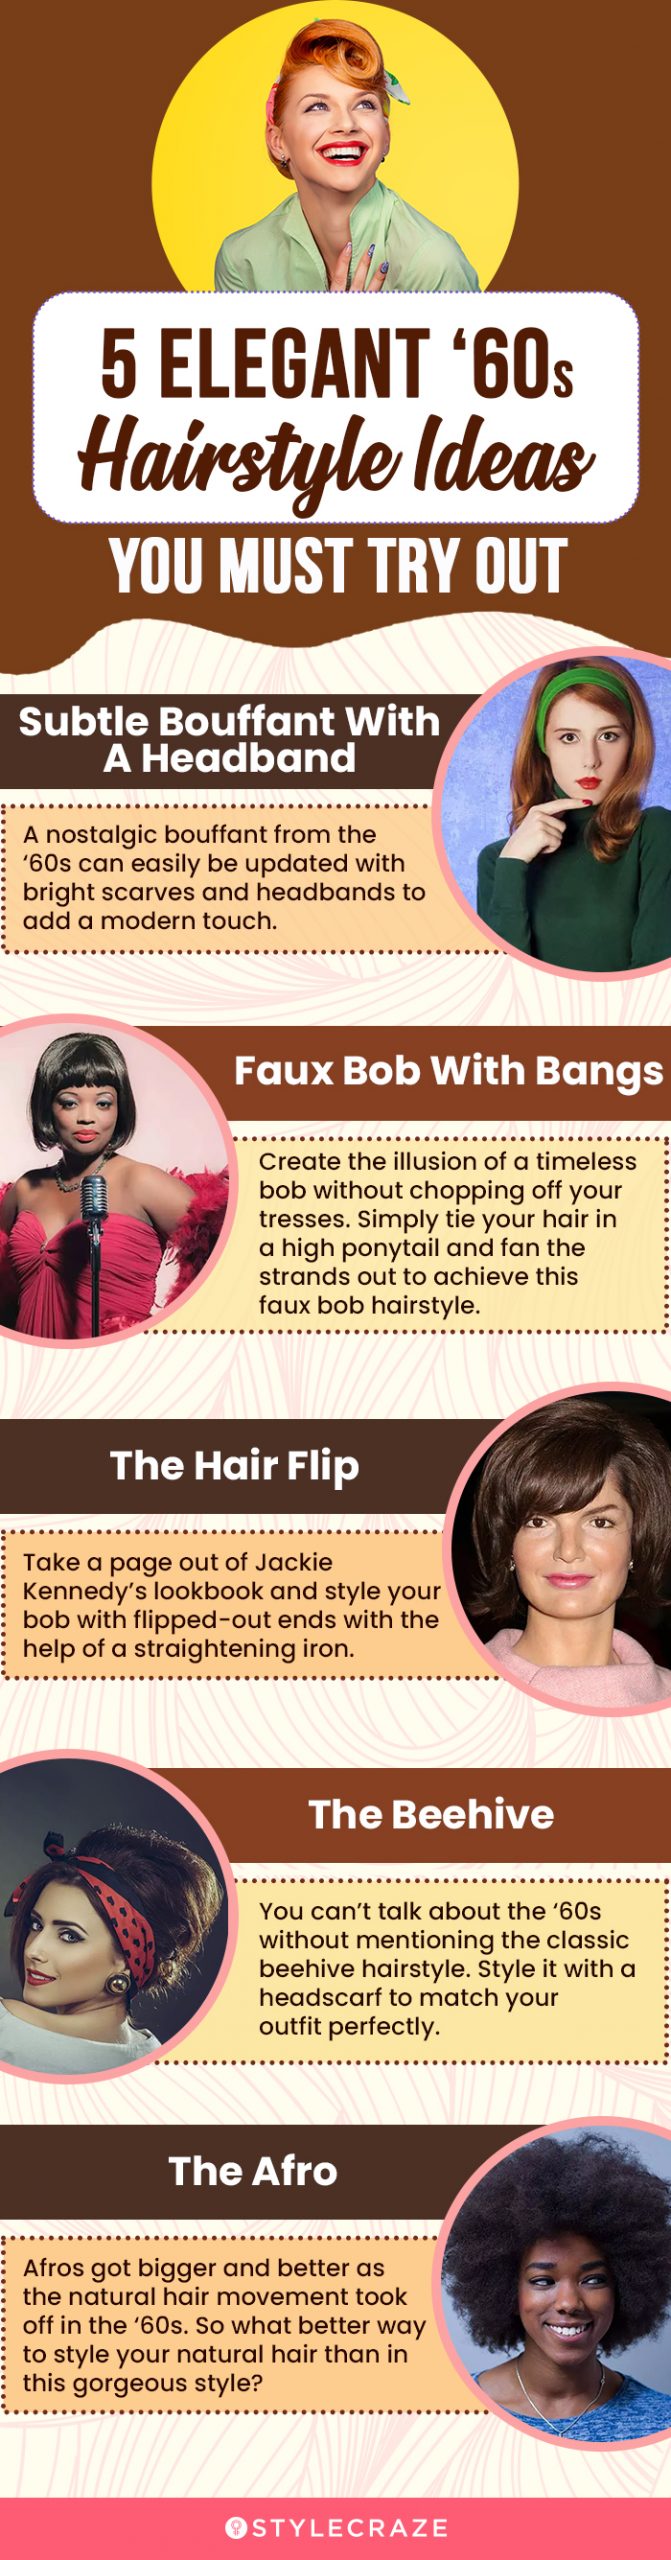 5 elegant ‘60s hairstyles ideas you must try out (infographic)